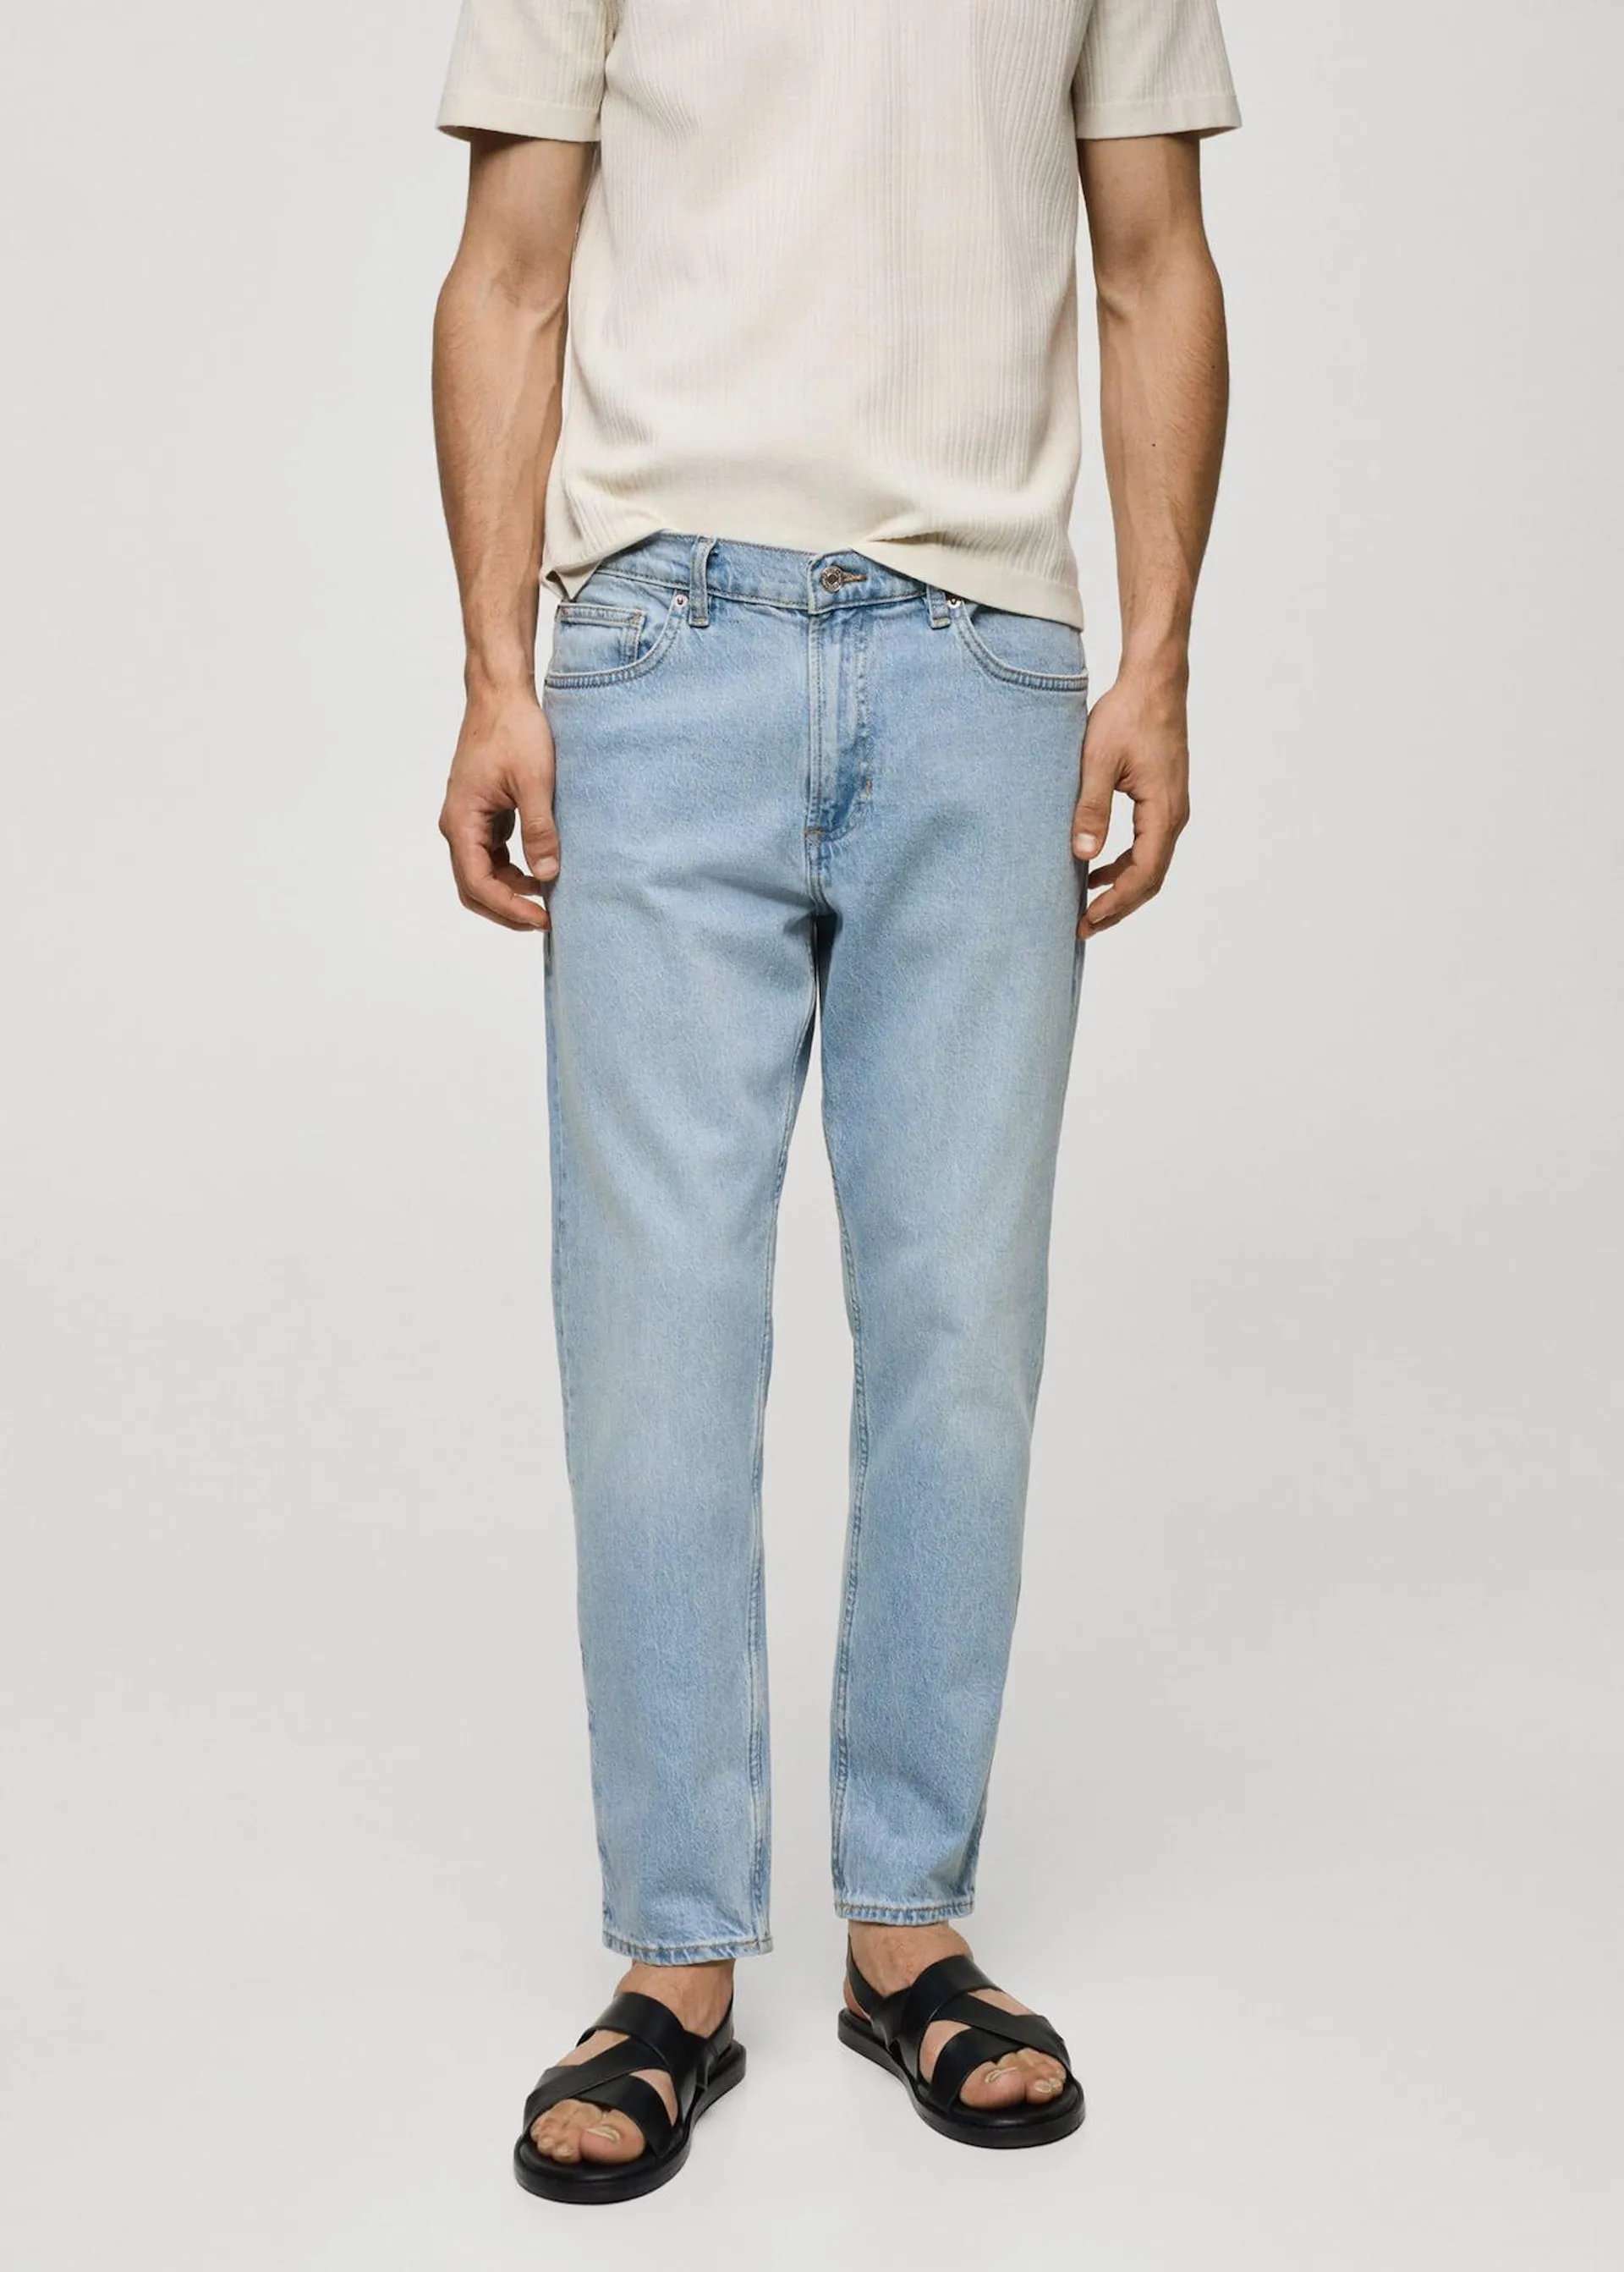 Ben tapered-fit jeans